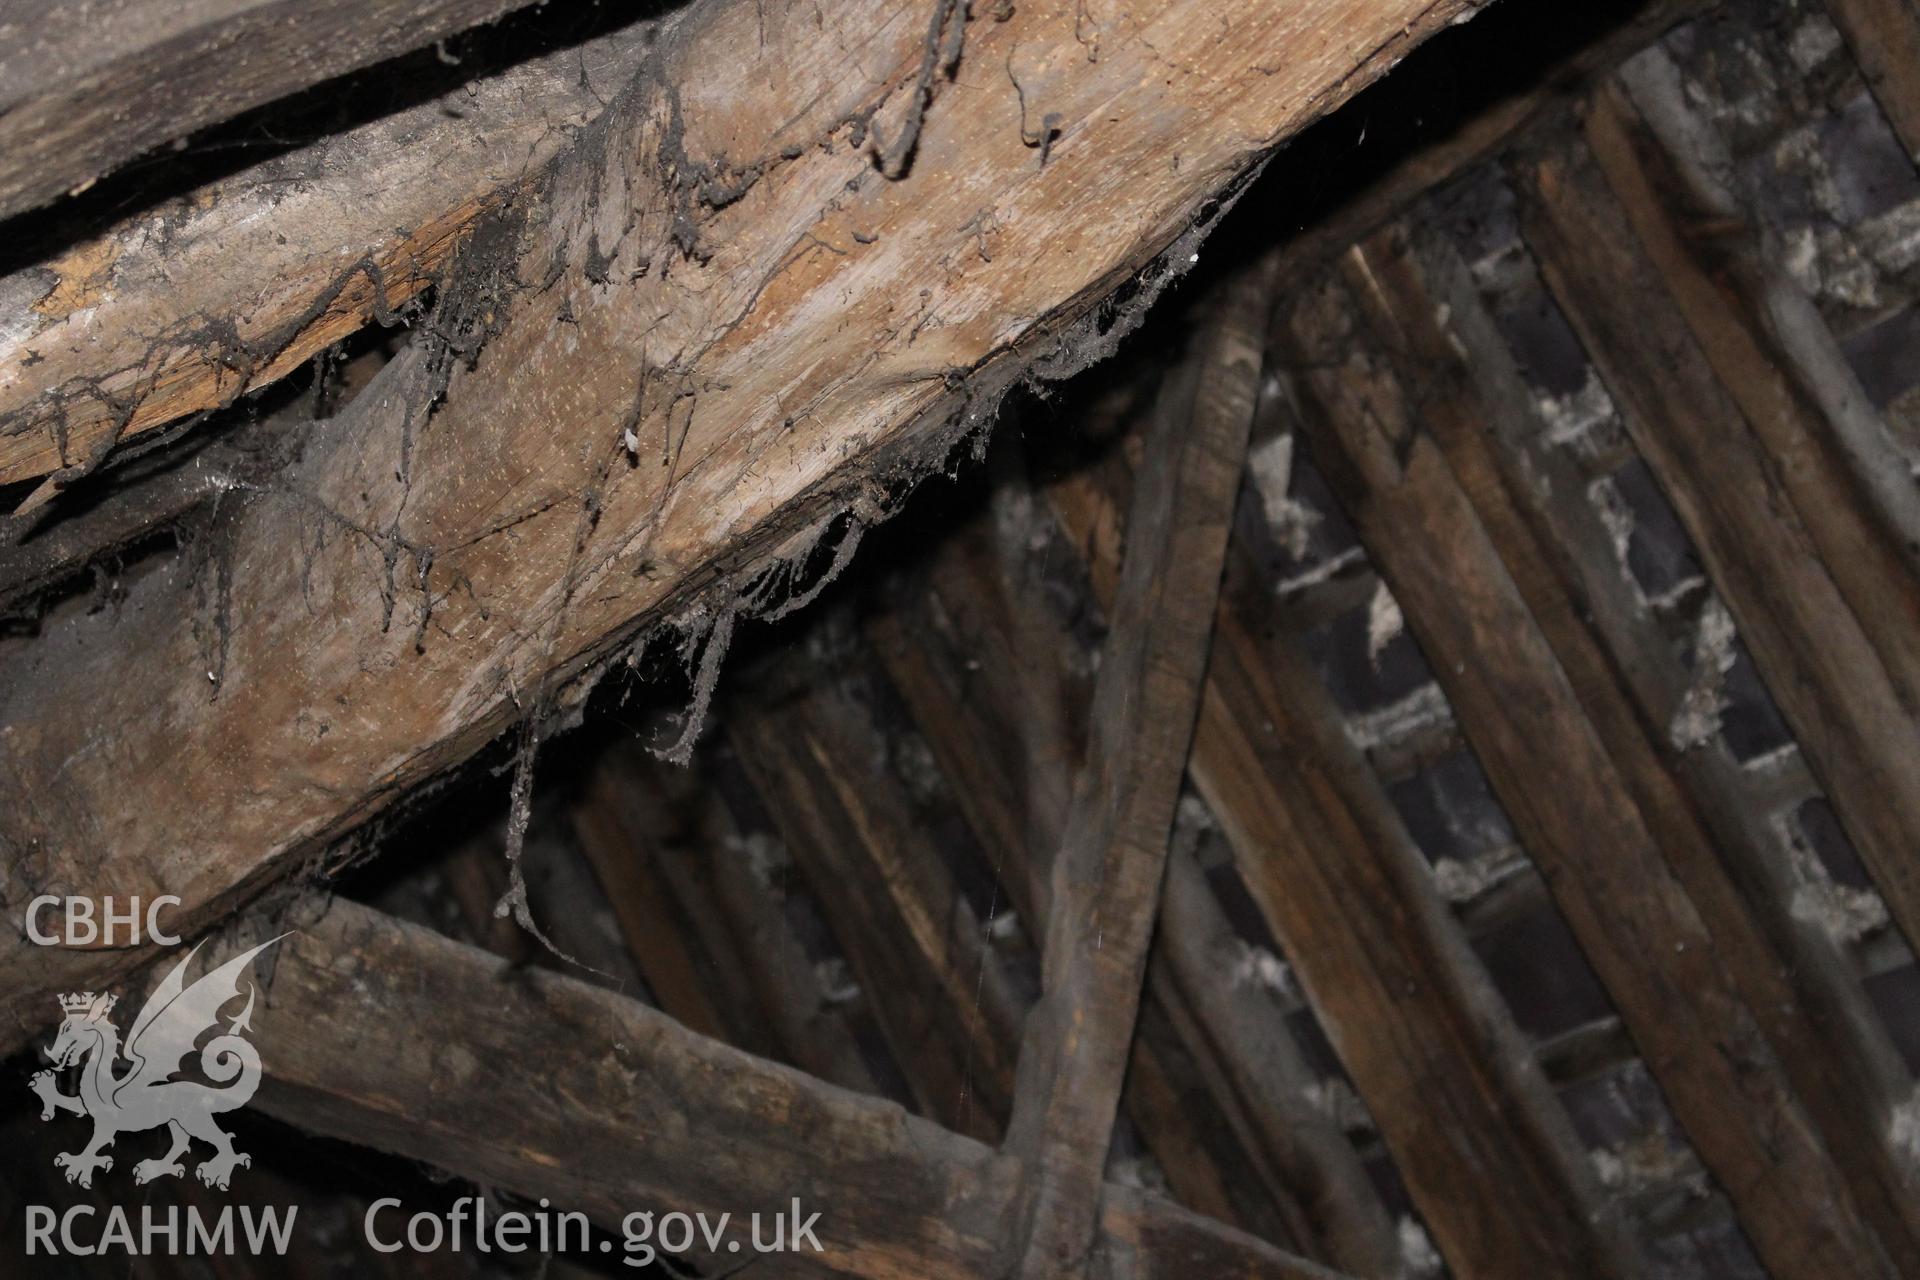 Colour photograph showing interior detail of timber roof frame at 5-7 Mwrog Street, Ruthin. Photographed during survey conducted by Geoff Ward on 14th May 2014.